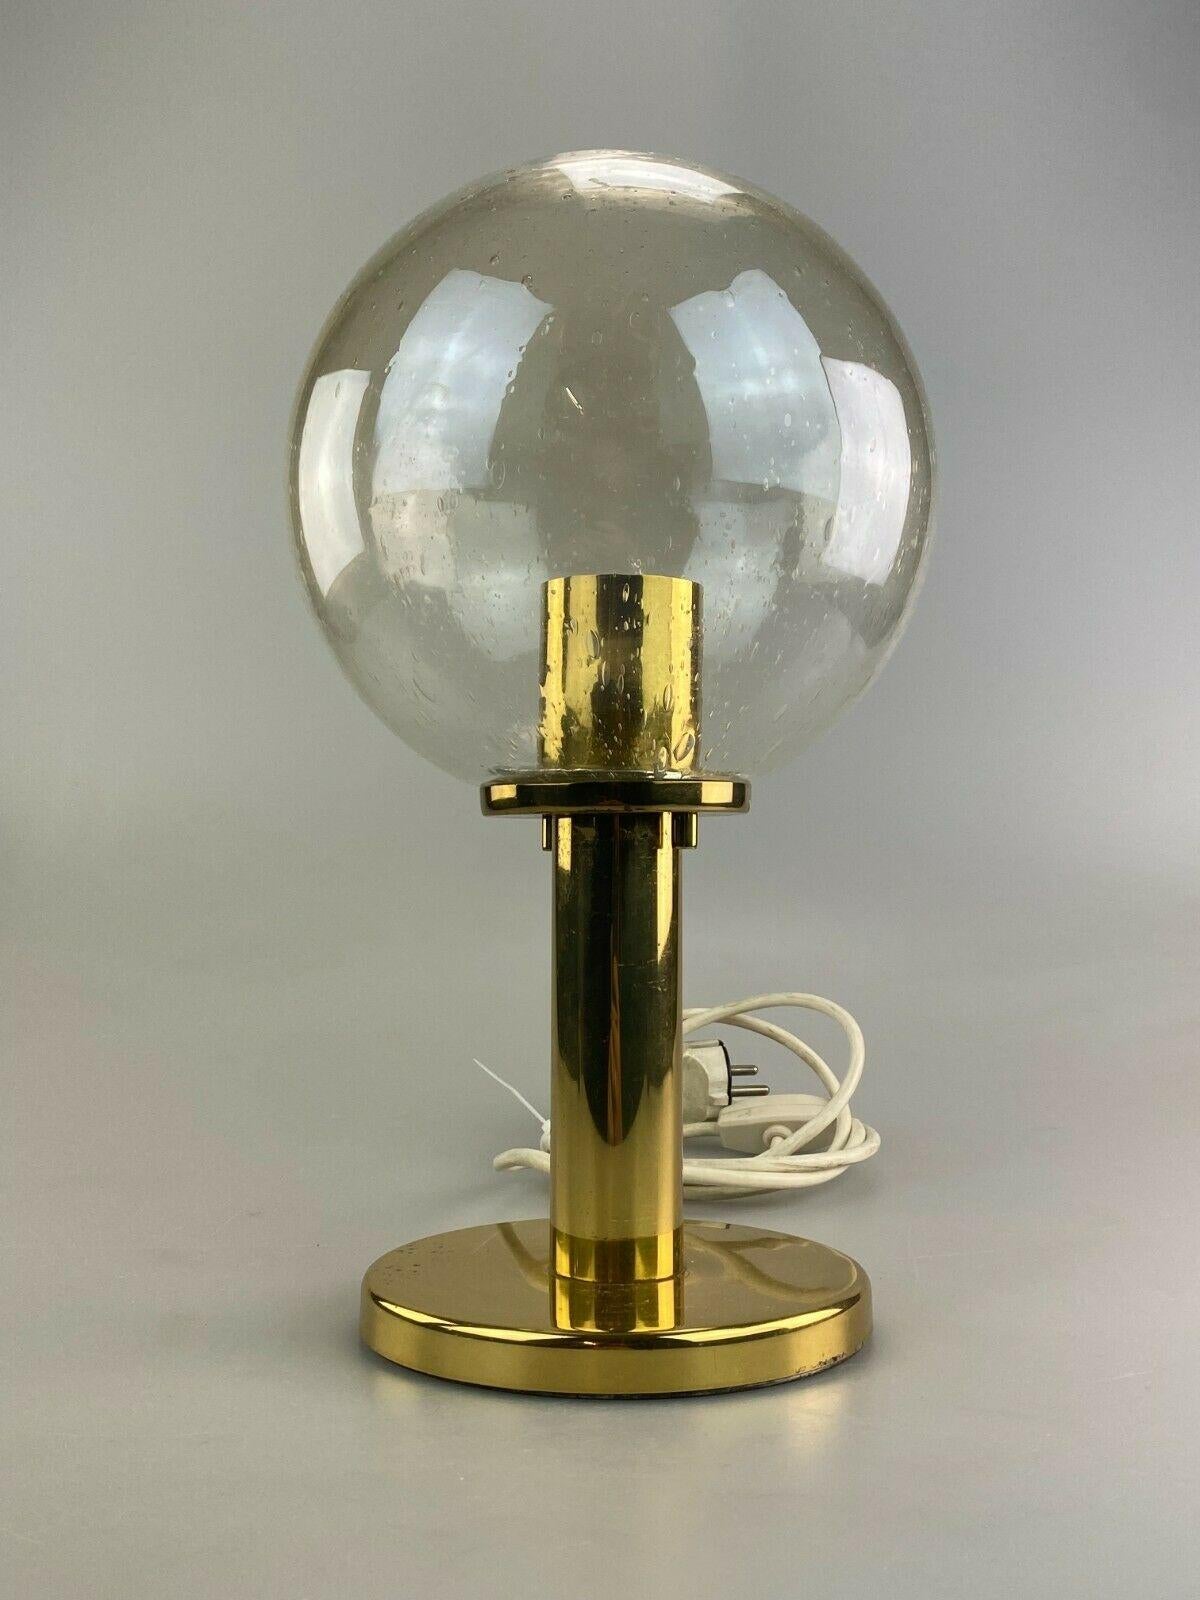 60s 70s ball lamp light table lamp bedside lamp space age design

Object: spherical lamp

Manufacturer:

Condition: good

Age: around 1960-1970

Dimensions:

Diameter = 19cm
Height = 35cm

Other notes:

The pictures serve as part of